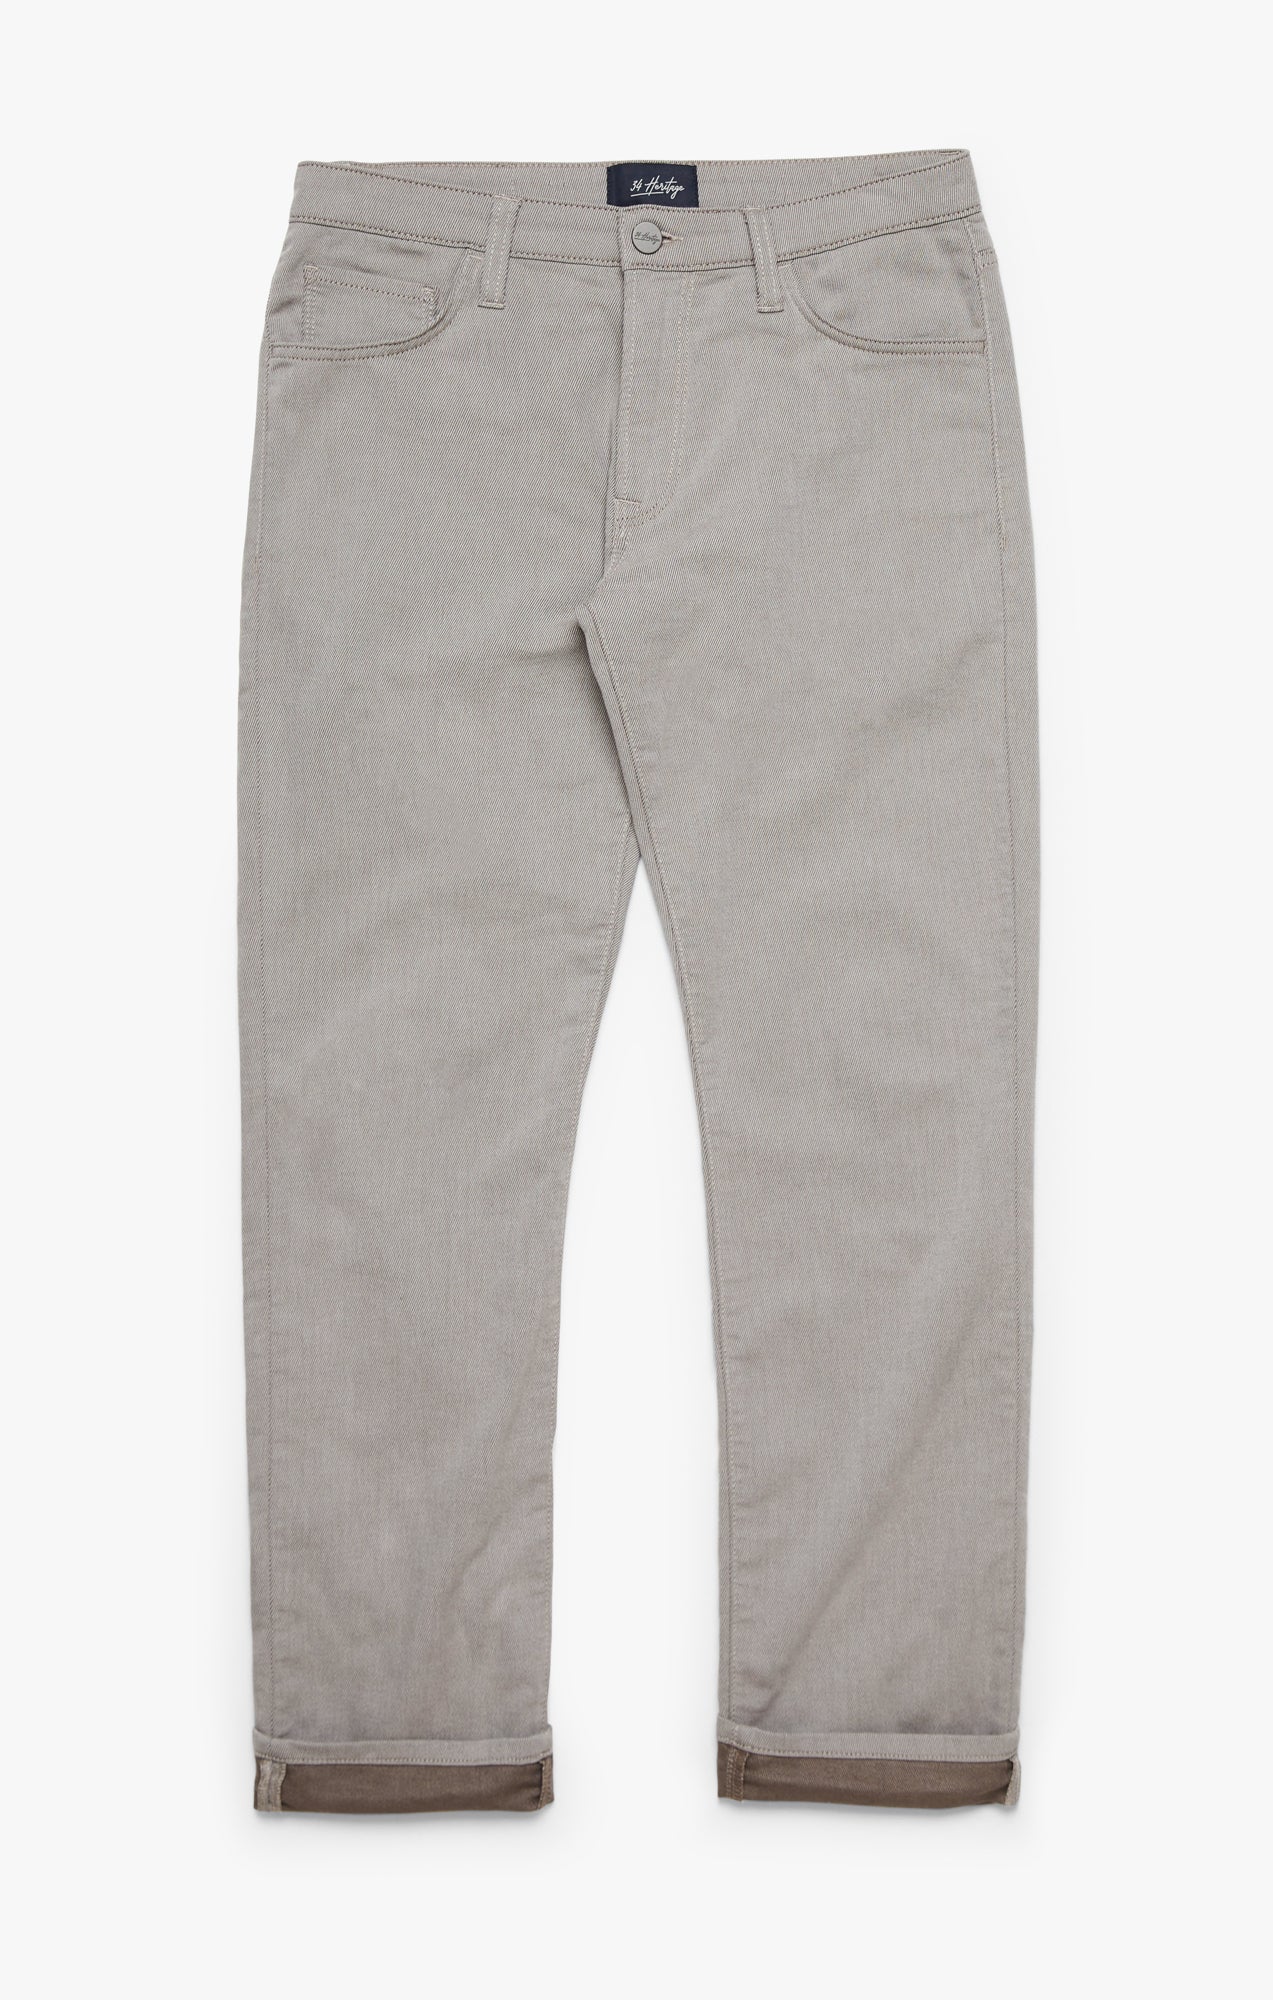 Courage Straight Leg Pants In Brown Refined Twill